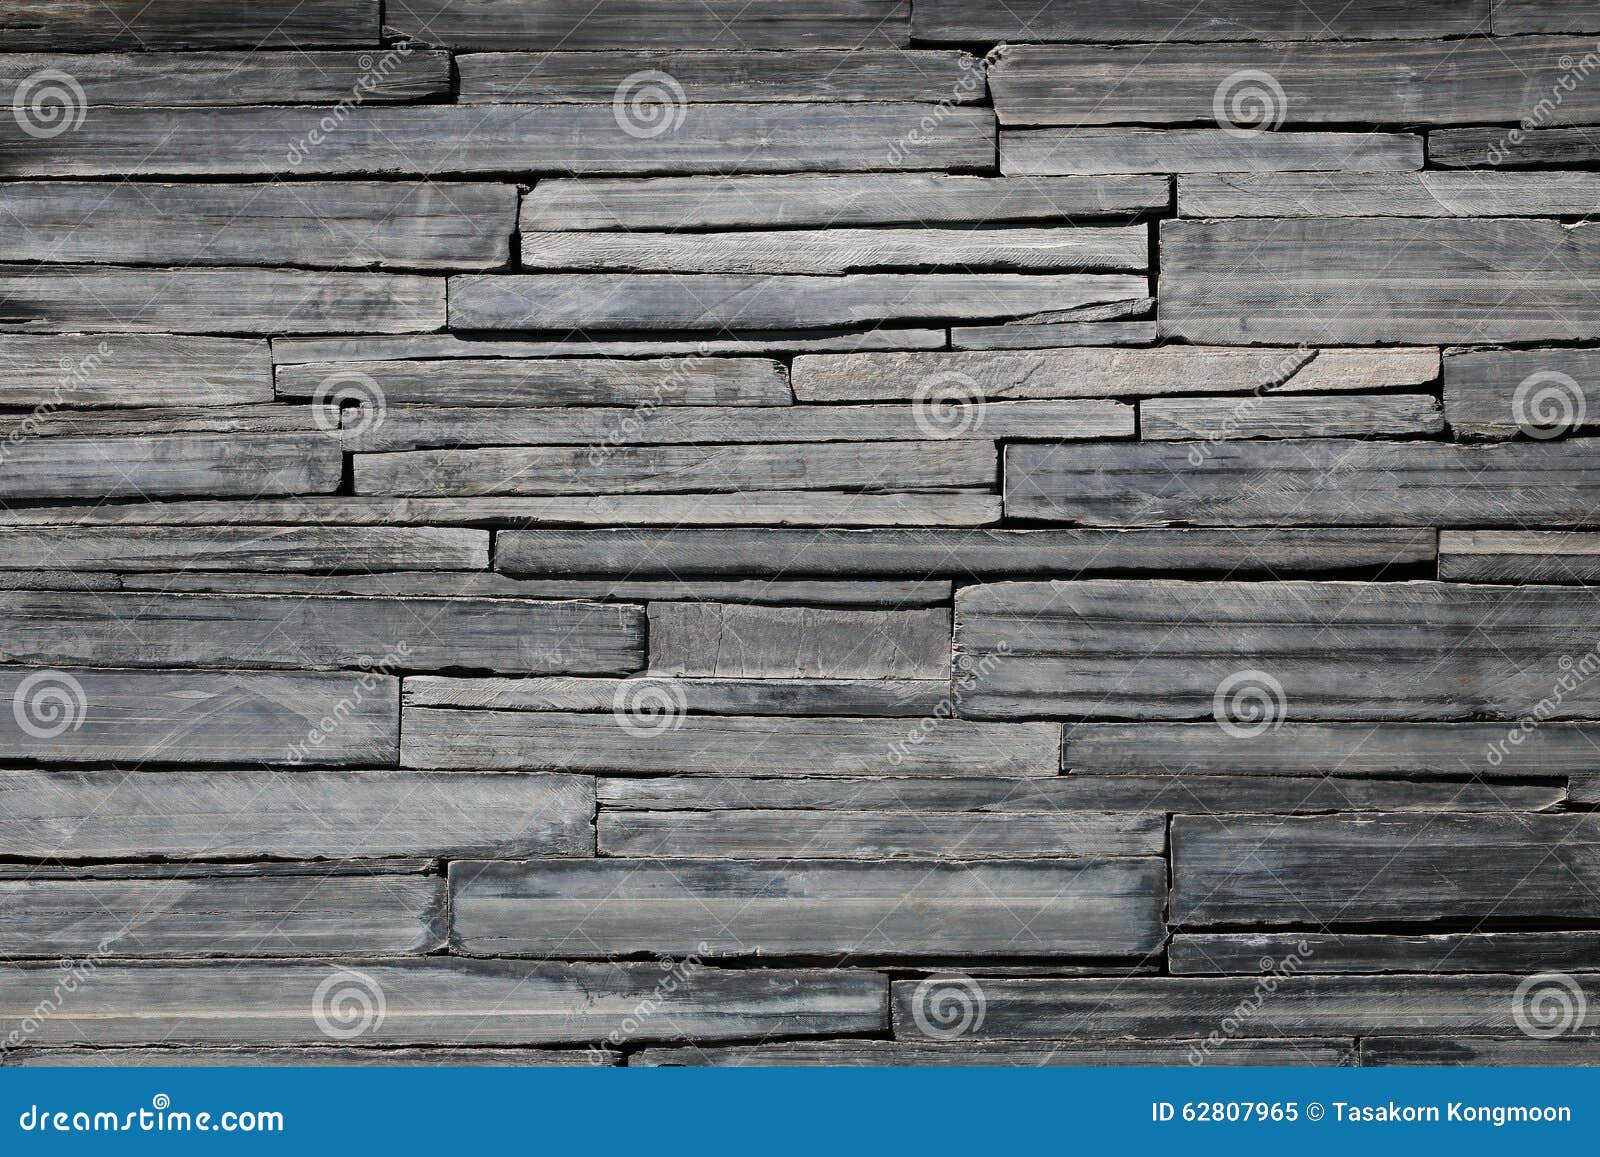 Black Brick Wall for Pattern Stock Image - Image of built, modern: 62807965